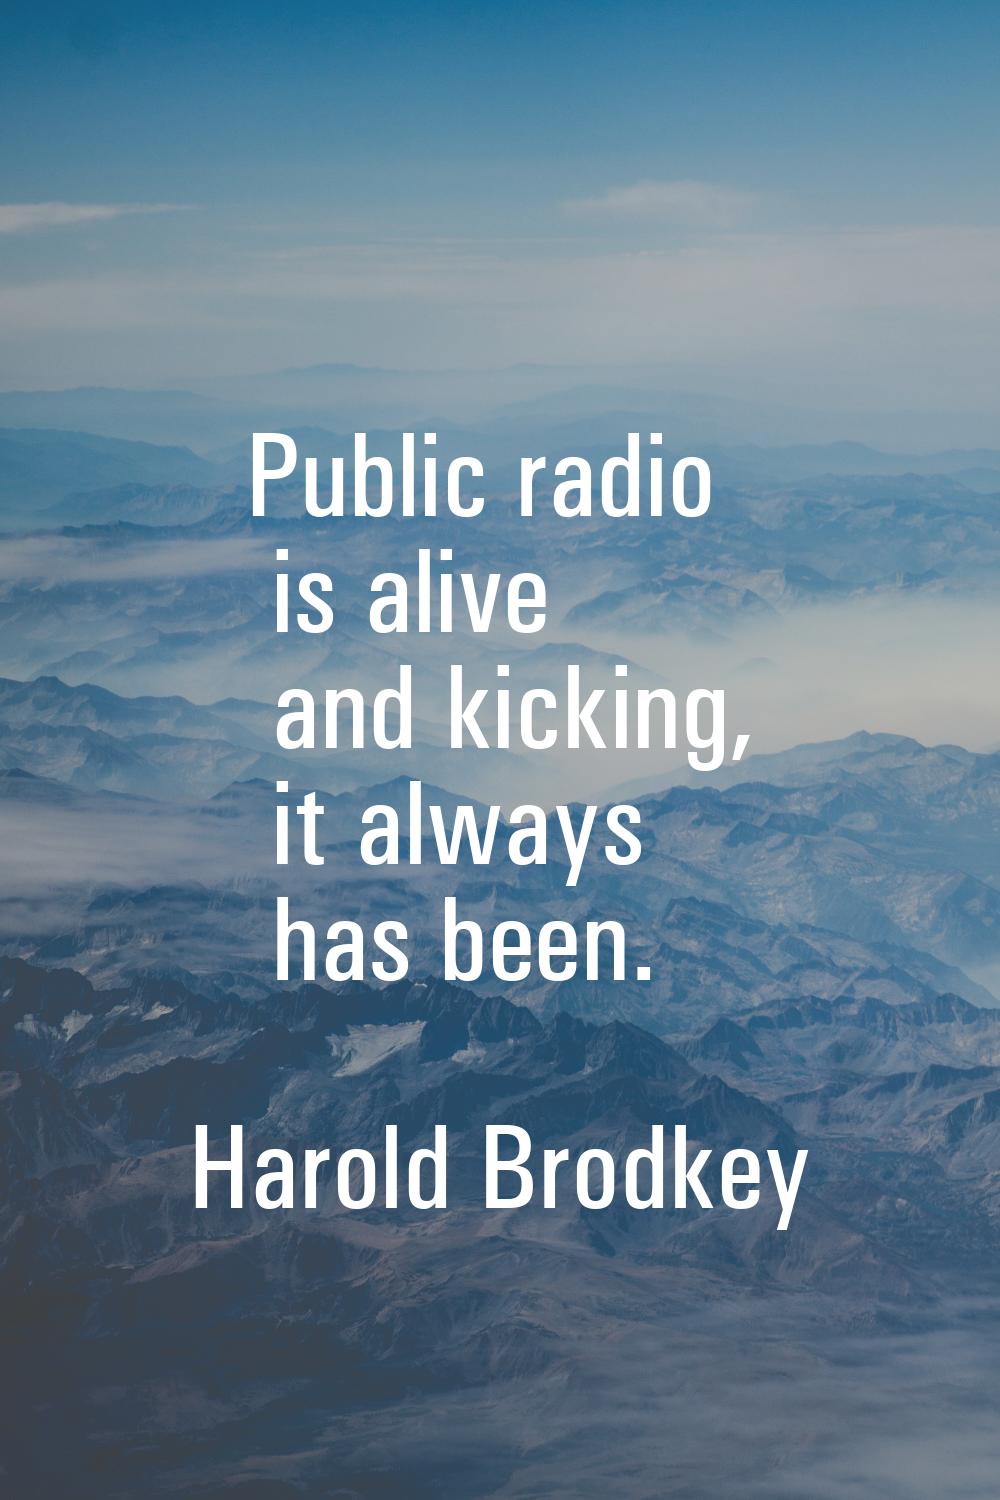 Public radio is alive and kicking, it always has been.